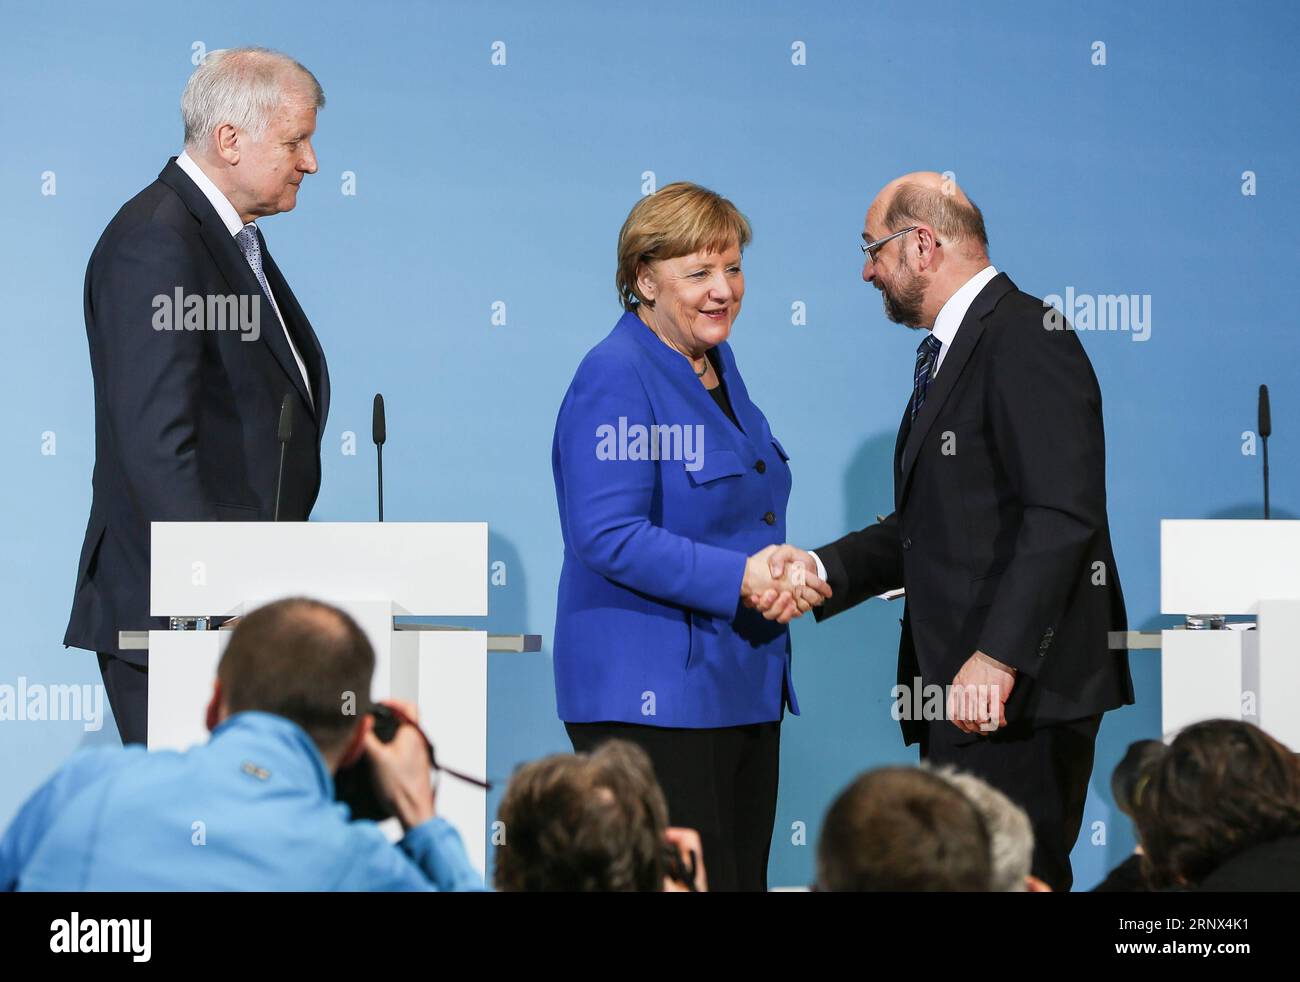 (180112) -- BERLIN, Jan. 12, 2018 -- German Chancellor and leader of German Christian Democratic Union (CDU) Angela Merkel (C) shakes hands with leader of German Social Democratic Party (SPD) Martin Schulz (R) after a joint press conference at the headquarters of SPD, in Berlin, Germany, on Jan. 12, 2018. German Chancellor Angela Merkel s conservatives and the Social Democrats (SPD) on Friday achieved a breakthrough in their exploratory talks aimed at forming a new coalition government, local media reported. )(srb) GERMANY-BERLIN-COALITION TALKS-BREAKTHROUGH ShanxYuqi PUBLICATIONxNOTxINxCHN Stock Photo